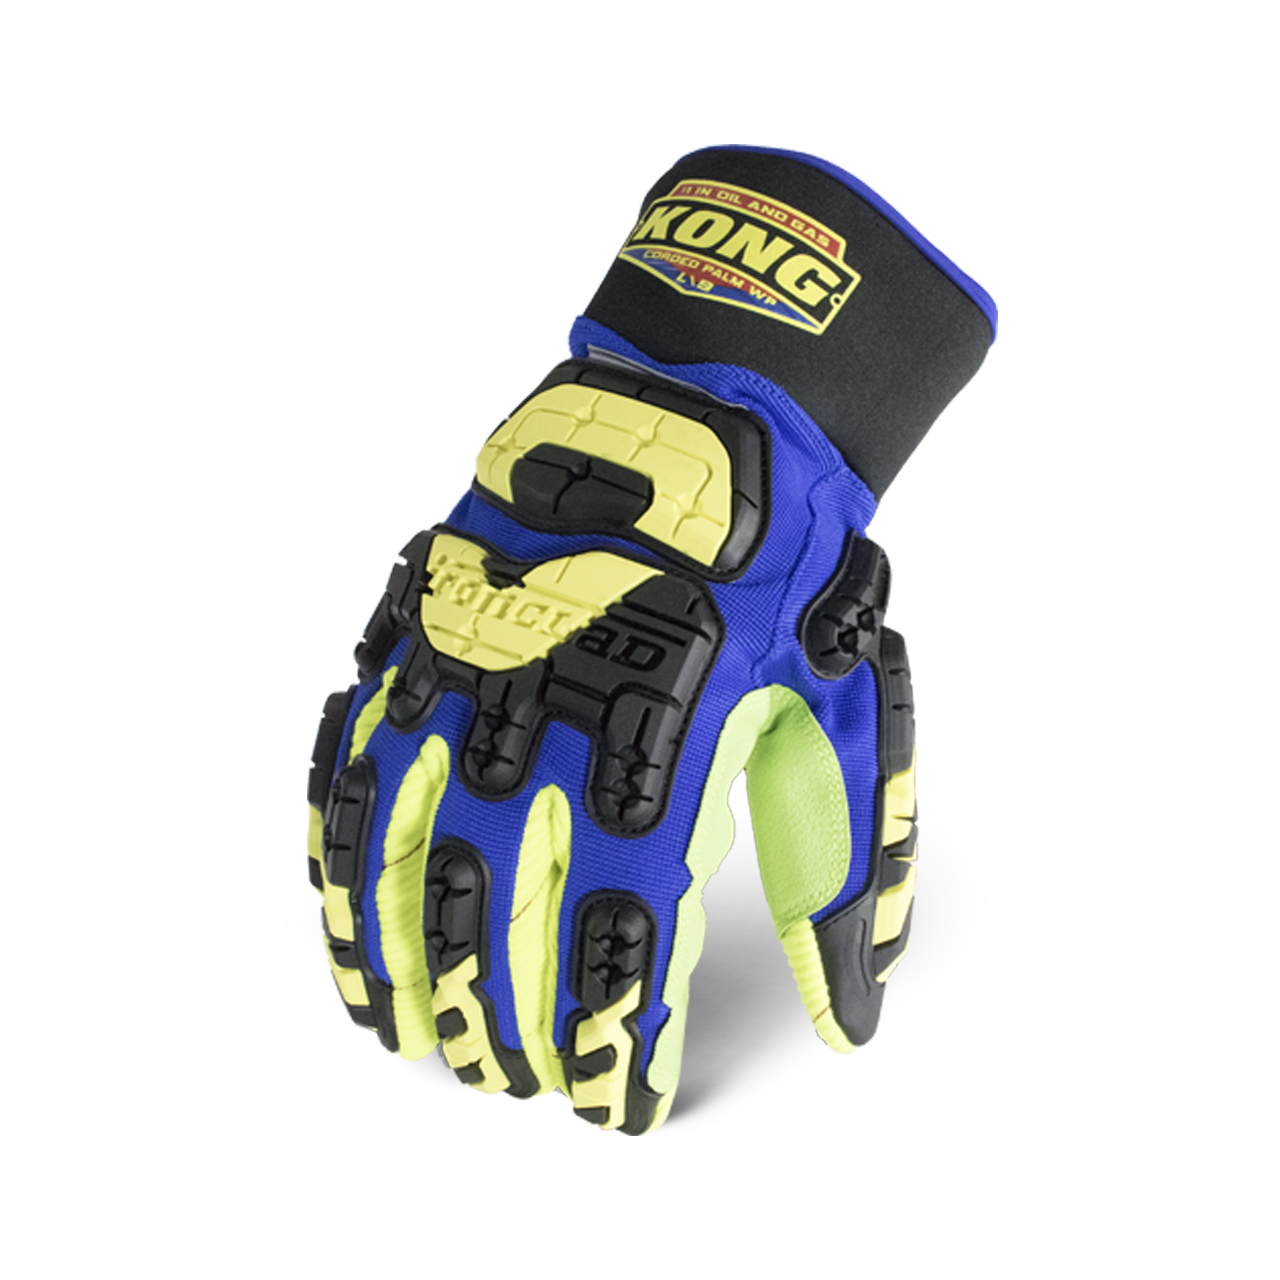 KONG® COTTON CORDED WATERPROOF IVE™ Impact Gloves